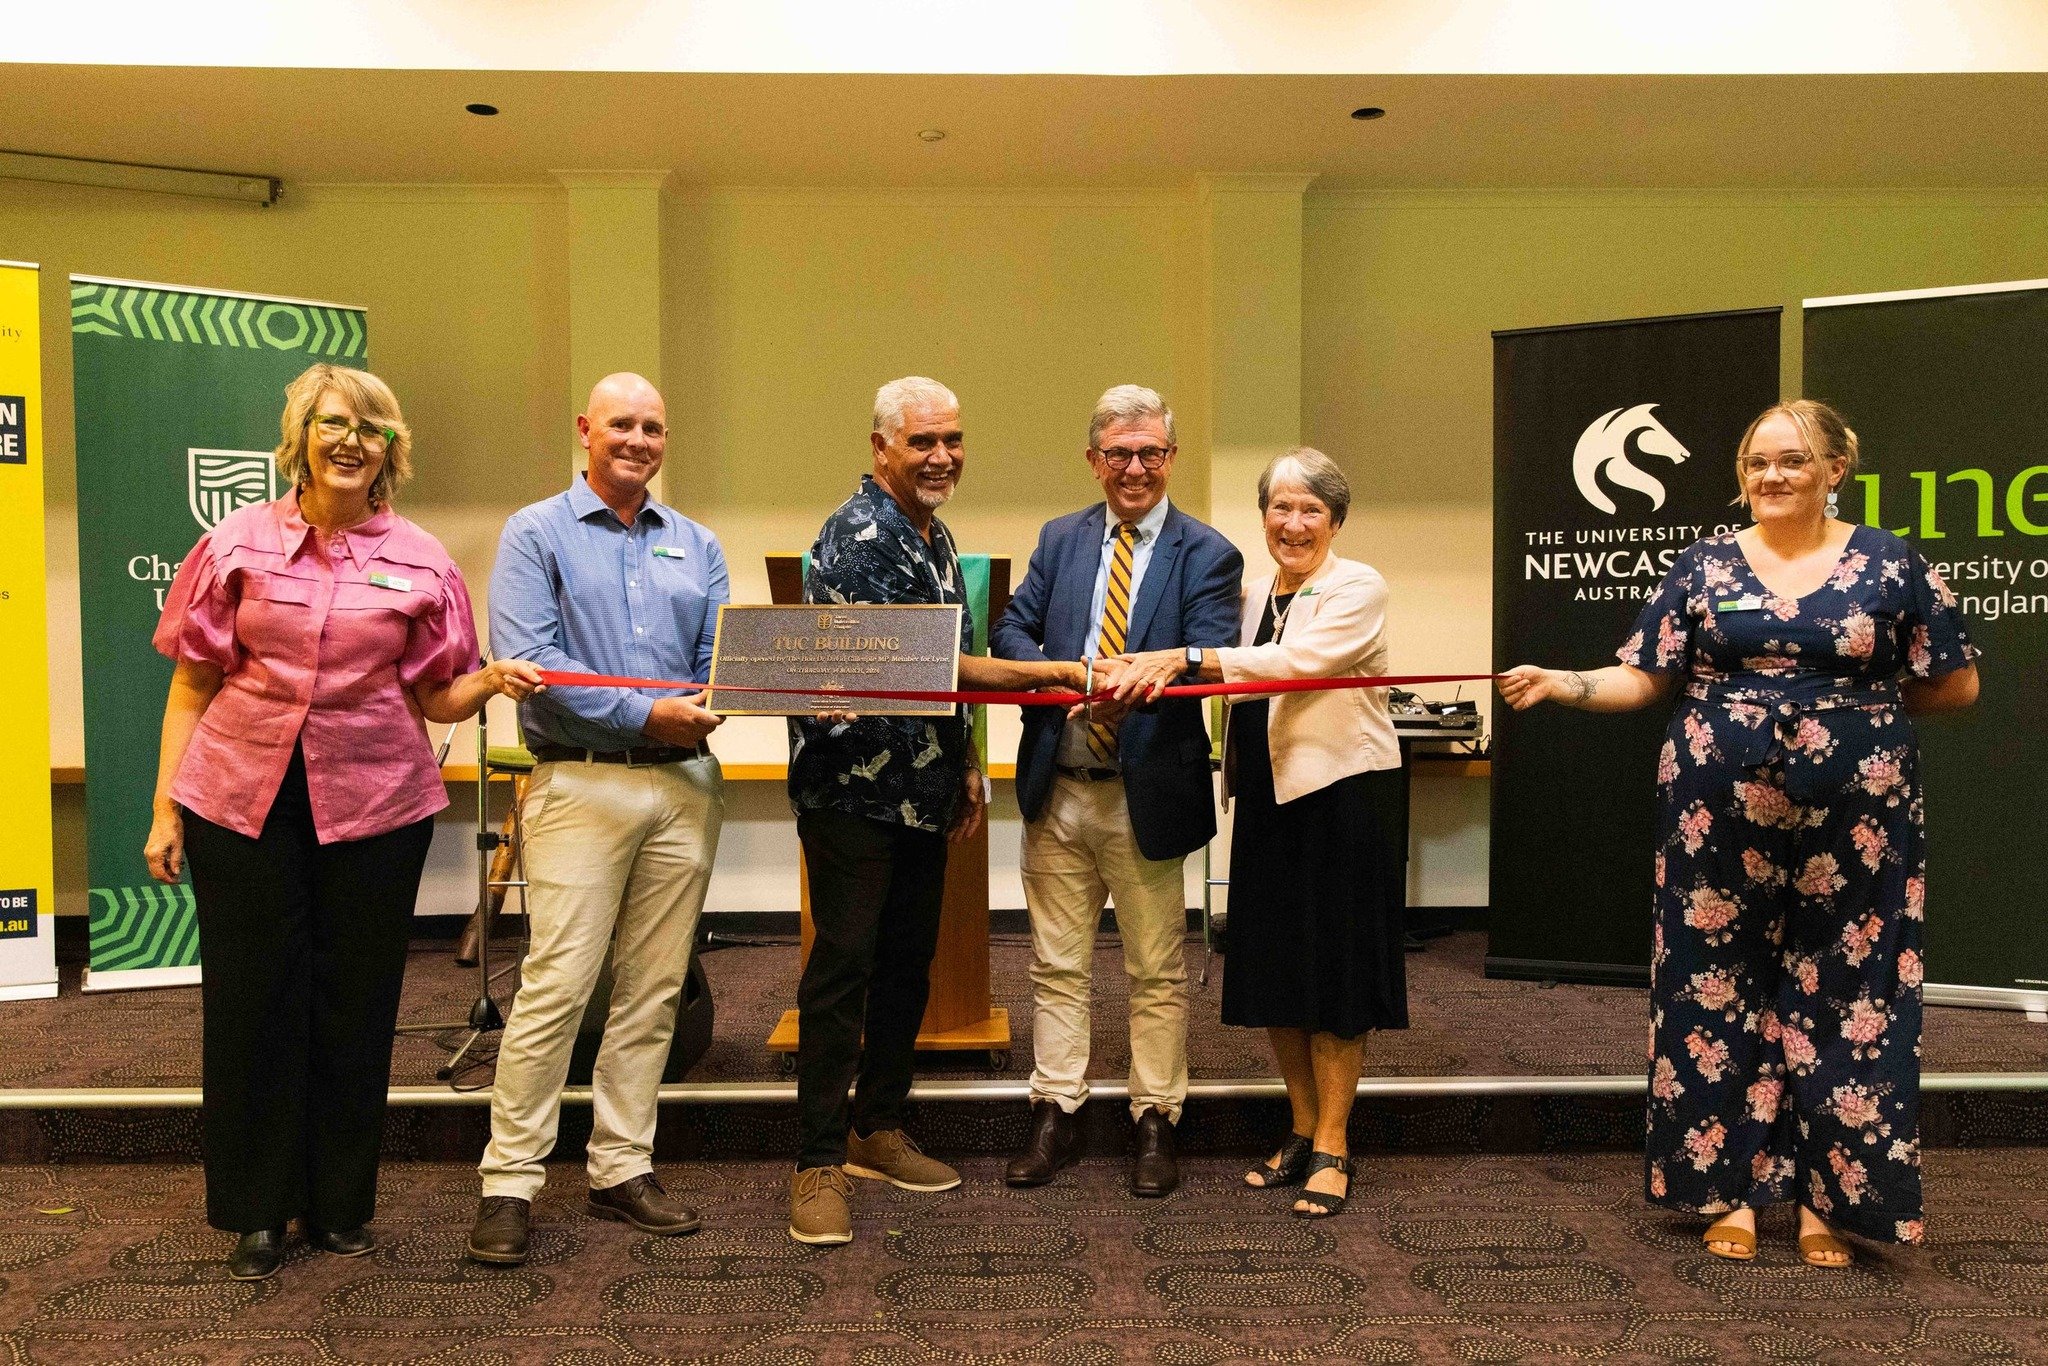 Our new Campus is now open in Taree!
Grand Opening of the TUC Building at 2 Pulteney Street

The Grand Opening Event at 2 Pulteney Street Taree was a momentous occasion for us at Taree University Campus (TUC), marking our transition to a larger premi